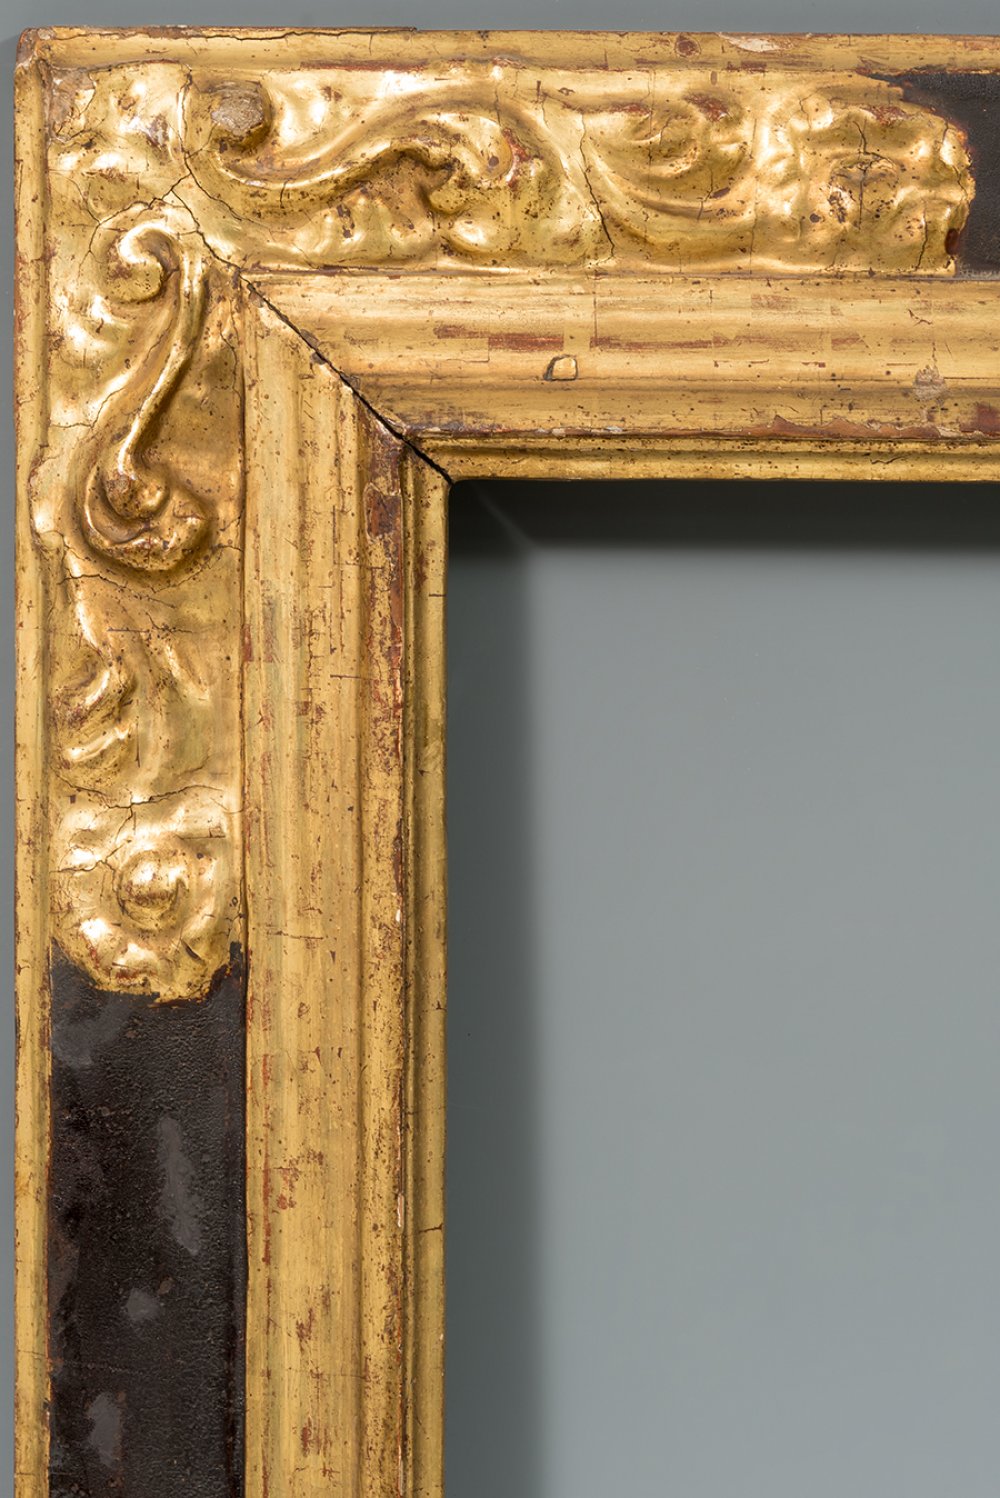 Frame; Spain, early 17th century.Wood.Measurements: 83 x 63 cm (light); 102 x 83 cm (frame). - Image 2 of 5